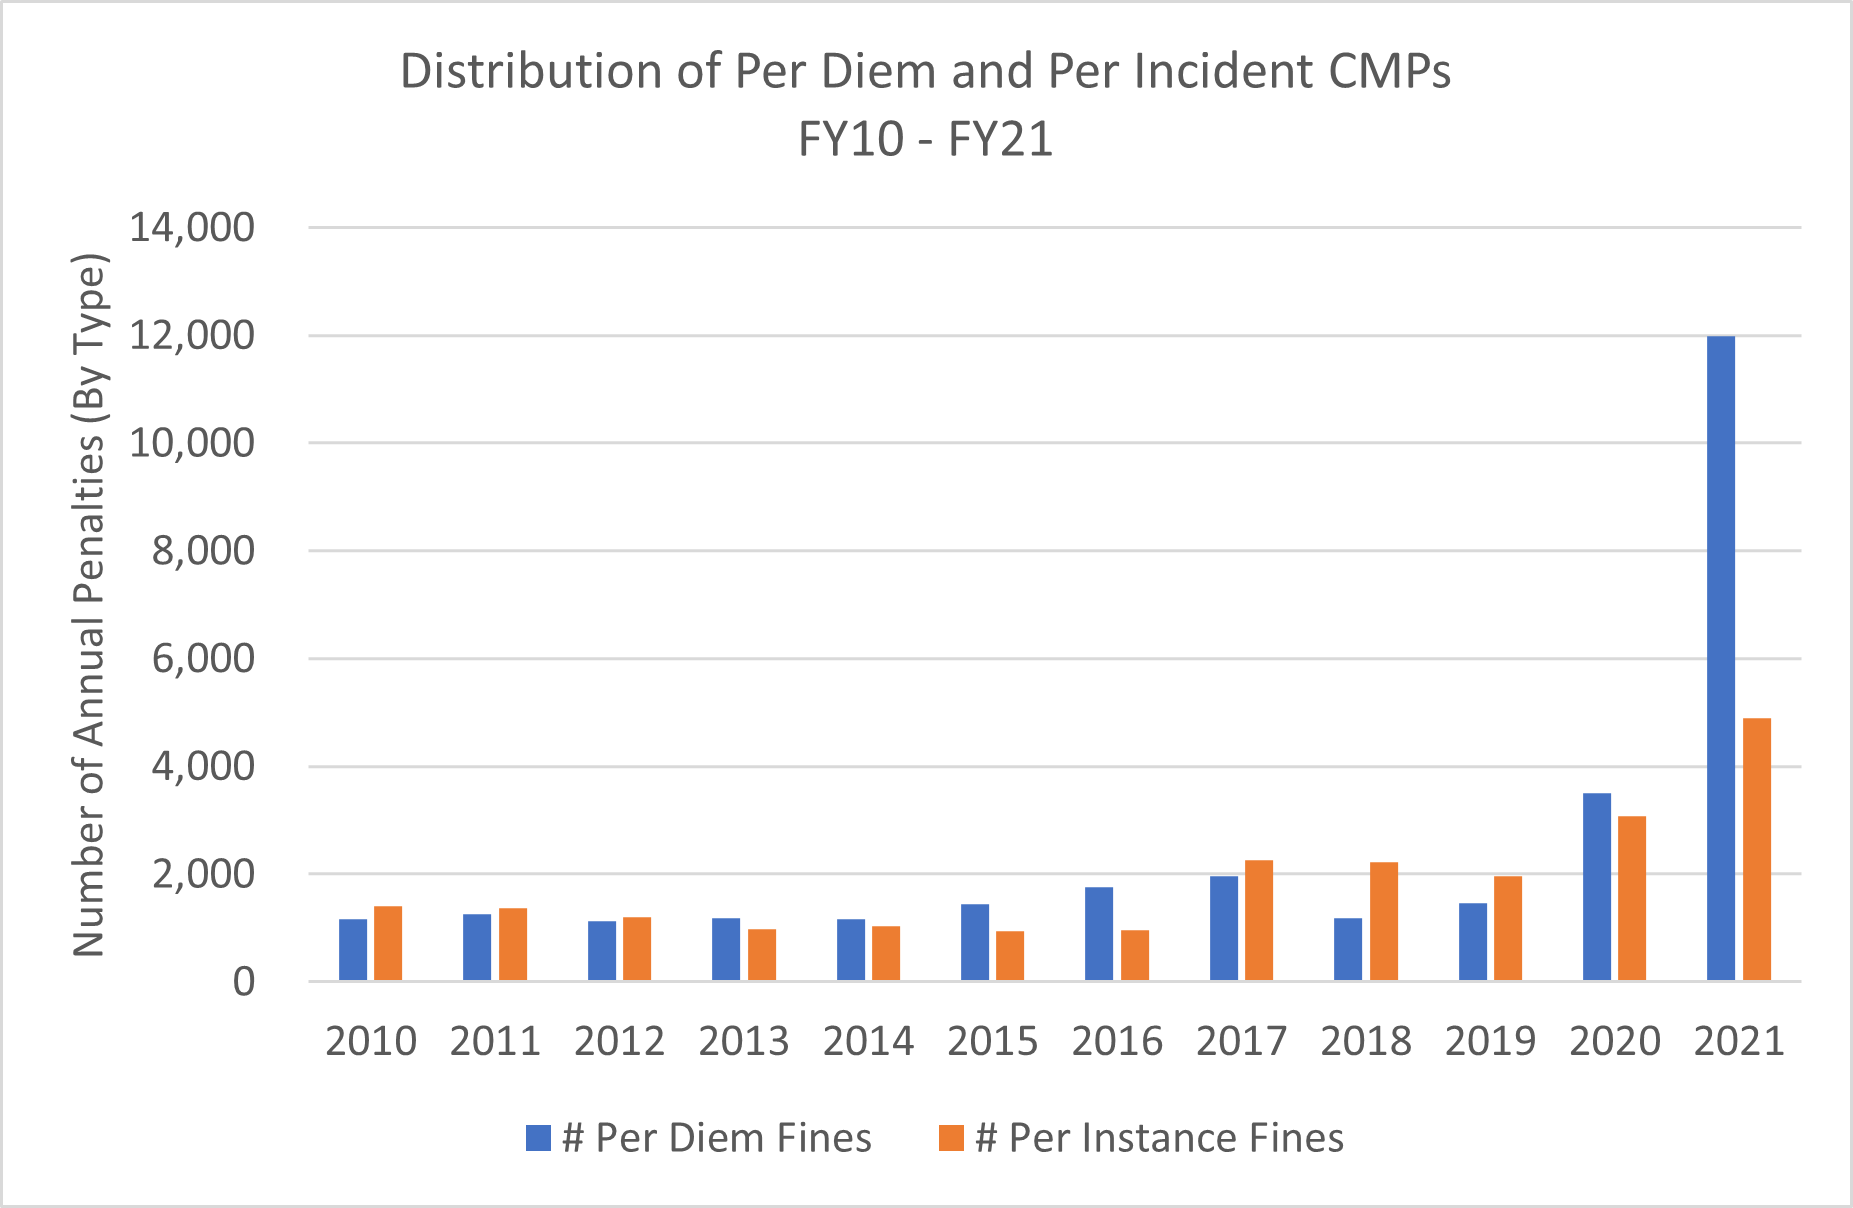 Distribution of CMPs